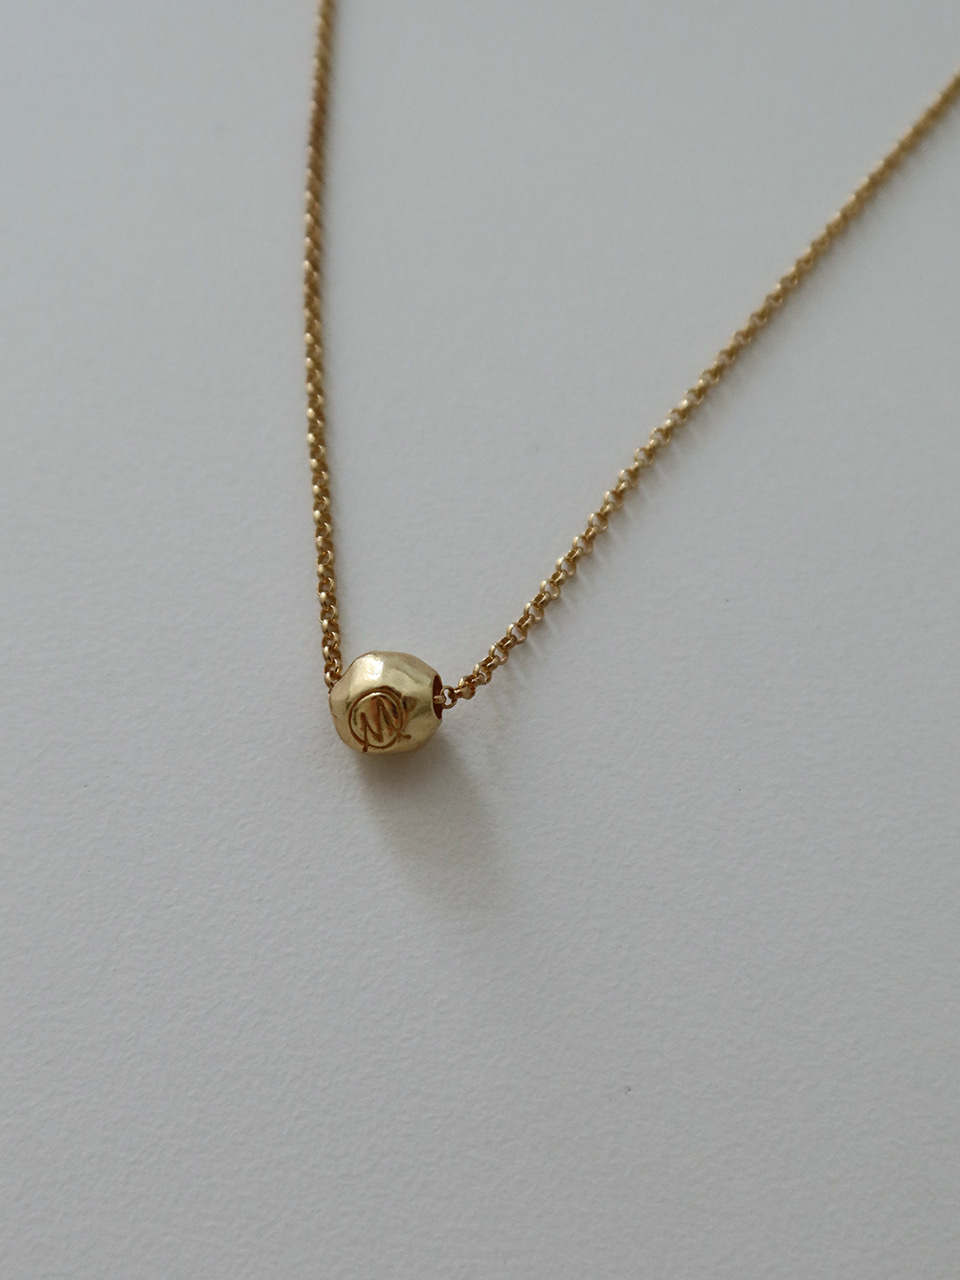 Bale necklace - gold